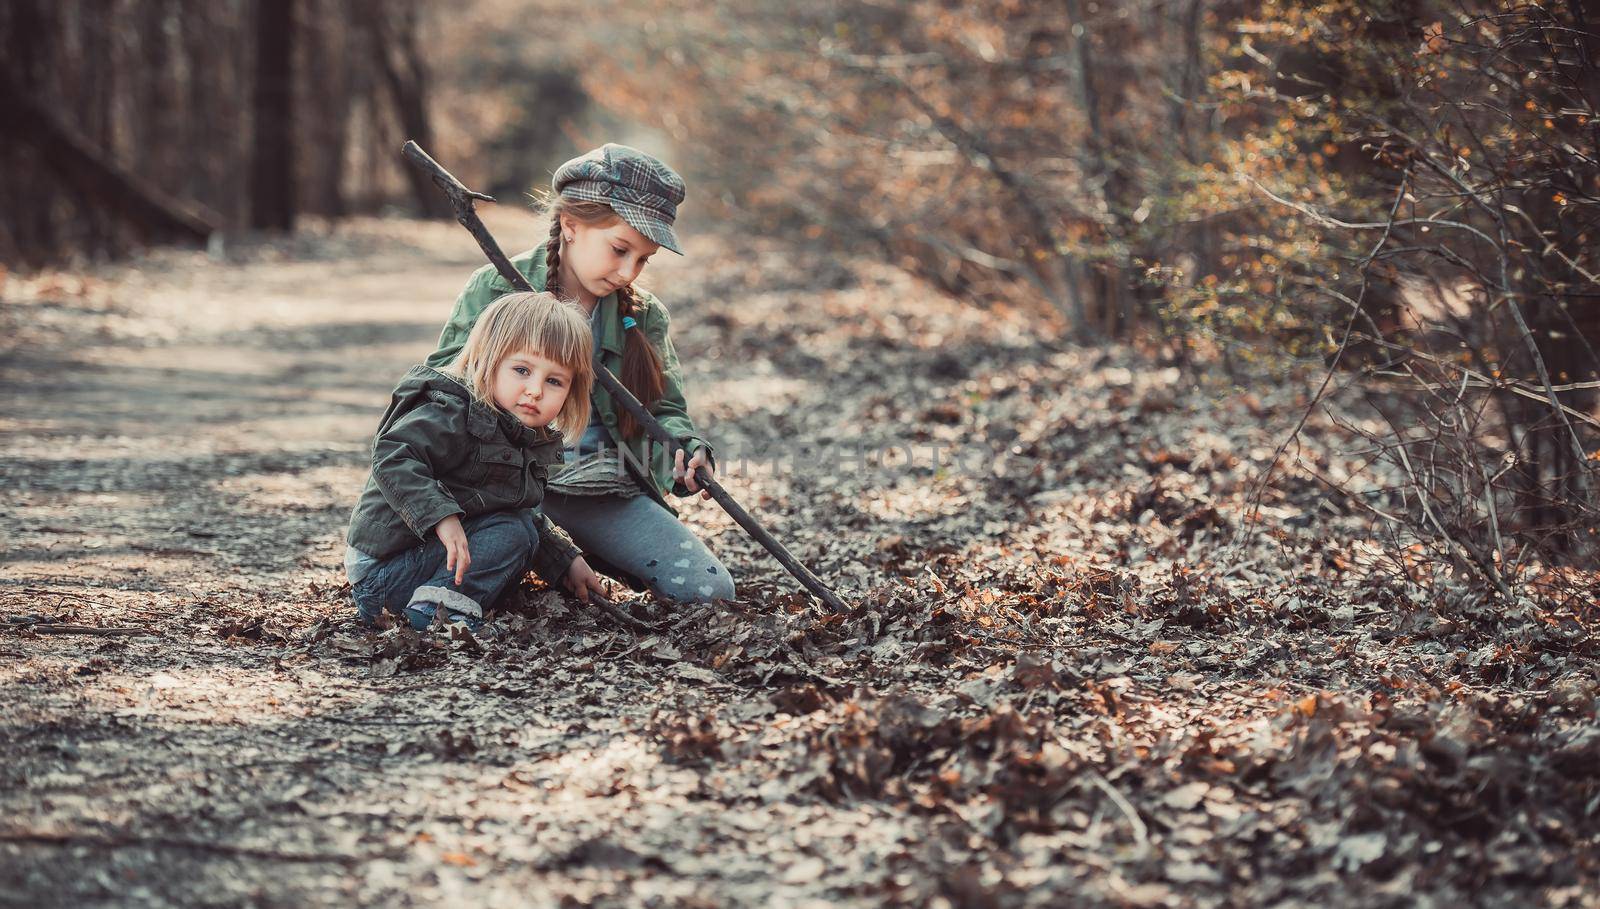 small children play in the woods, photo in vintage style